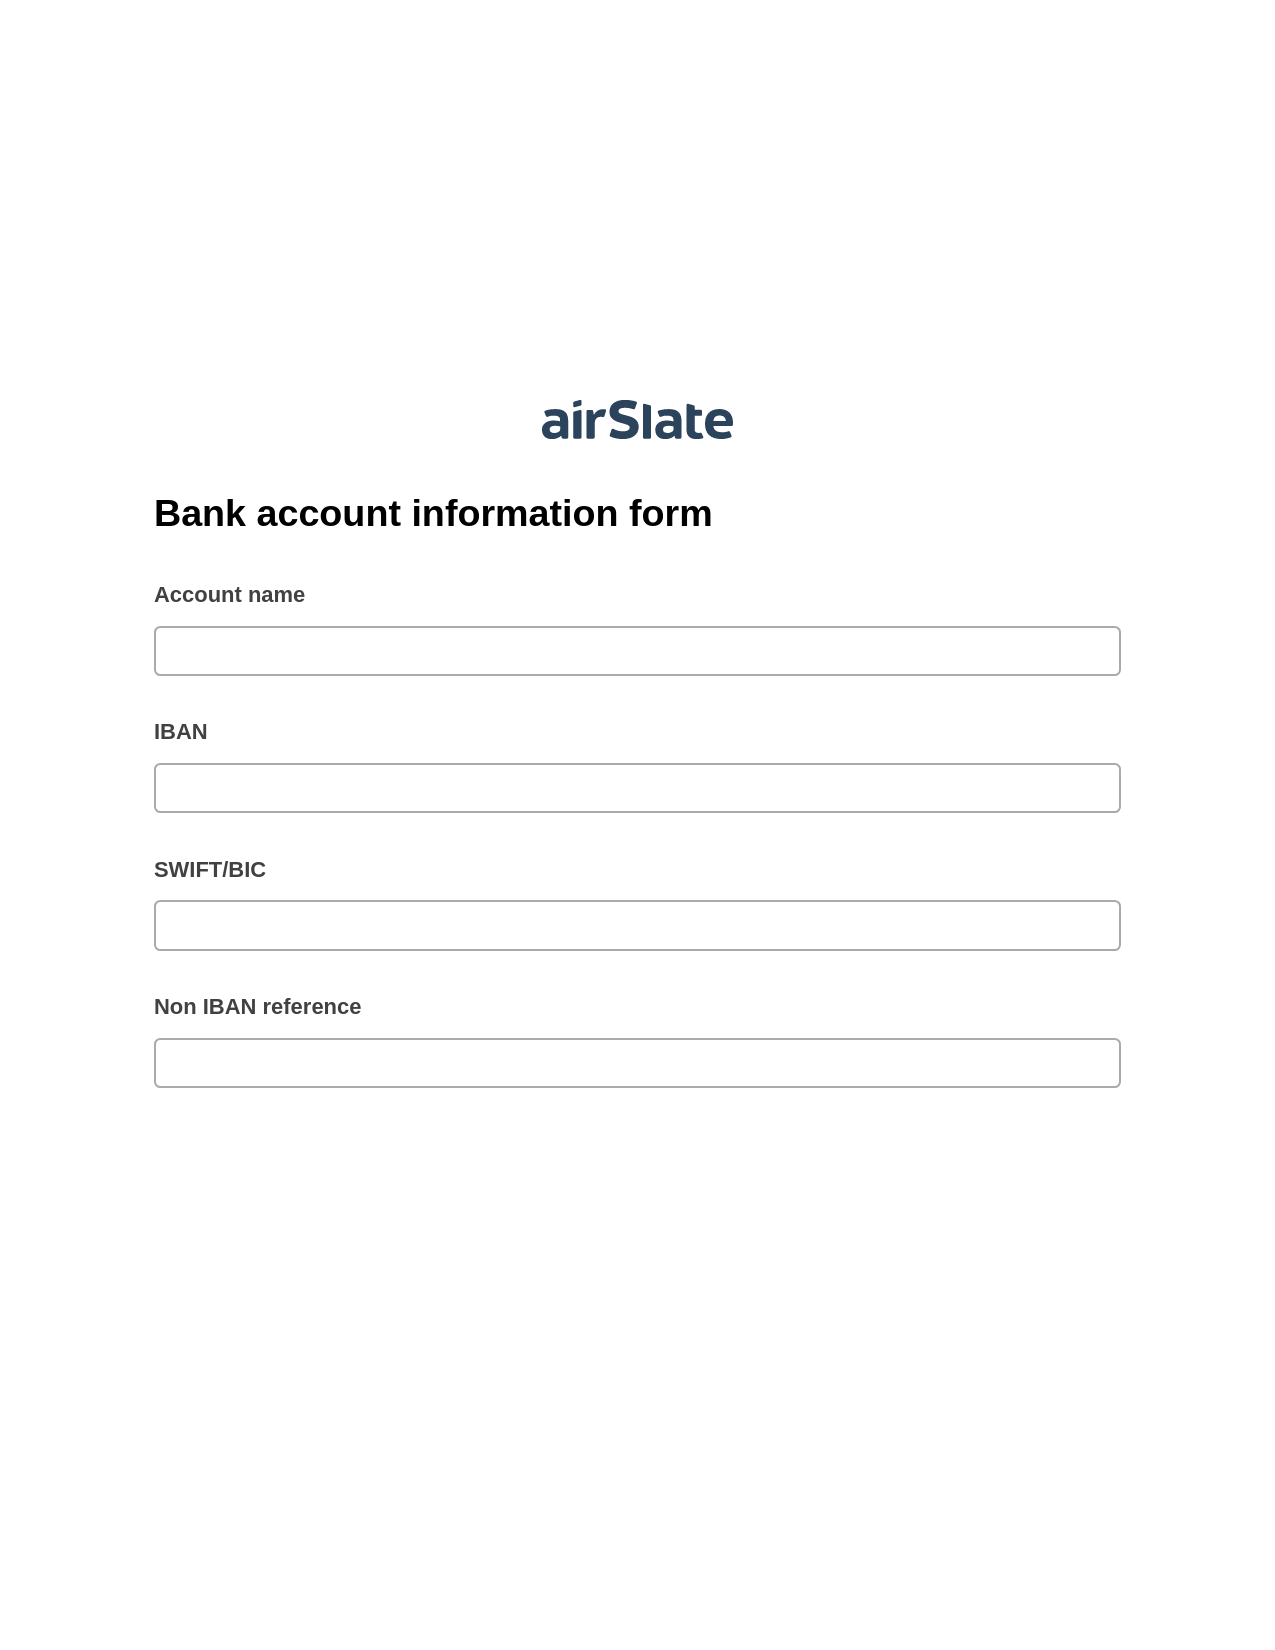 Bank account information form Pre-fill Dropdown from Airtable, Update Salesforce Record Bot, Post-finish Document Bot